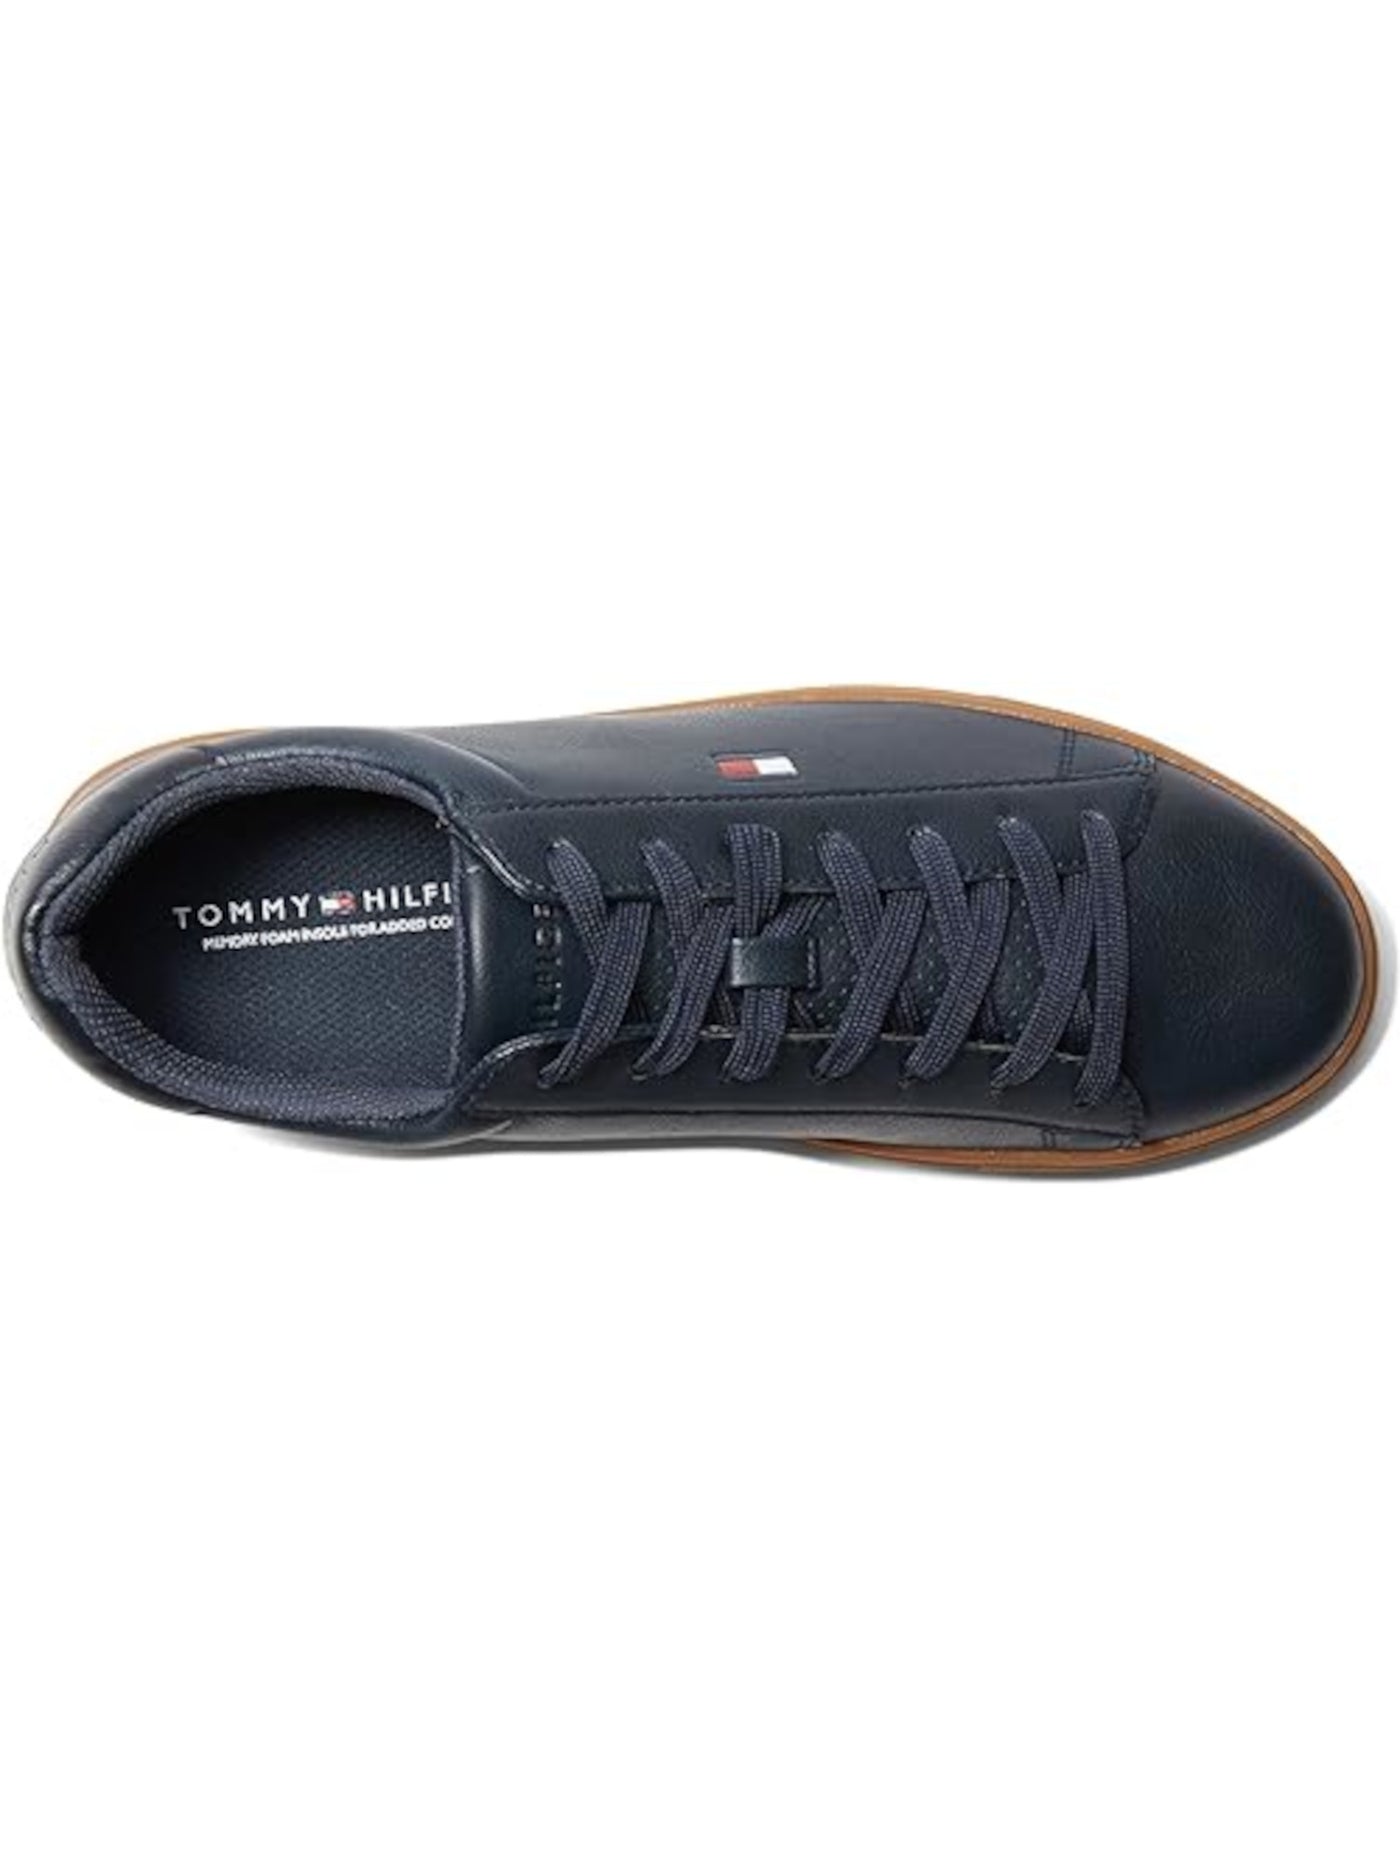 TOMMY HILFIGER Mens Navy Cushioned Brecon Round Toe Lace-Up Sneakers Shoes 11.5